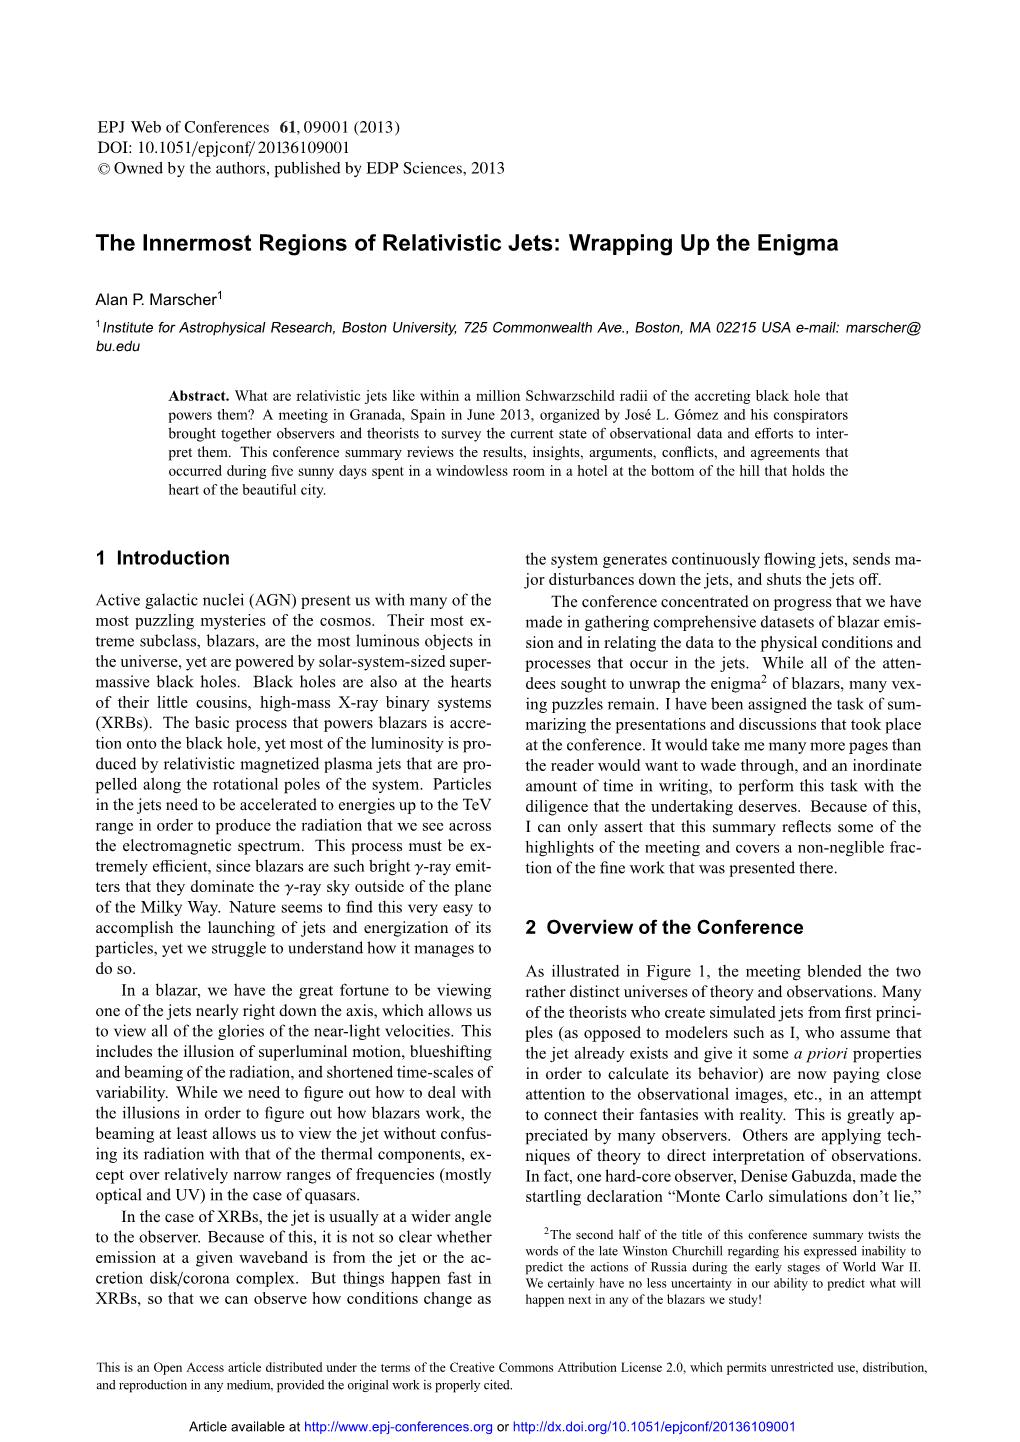 The Innermost Regions of Relativistic Jets: Wrapping up the Enigma